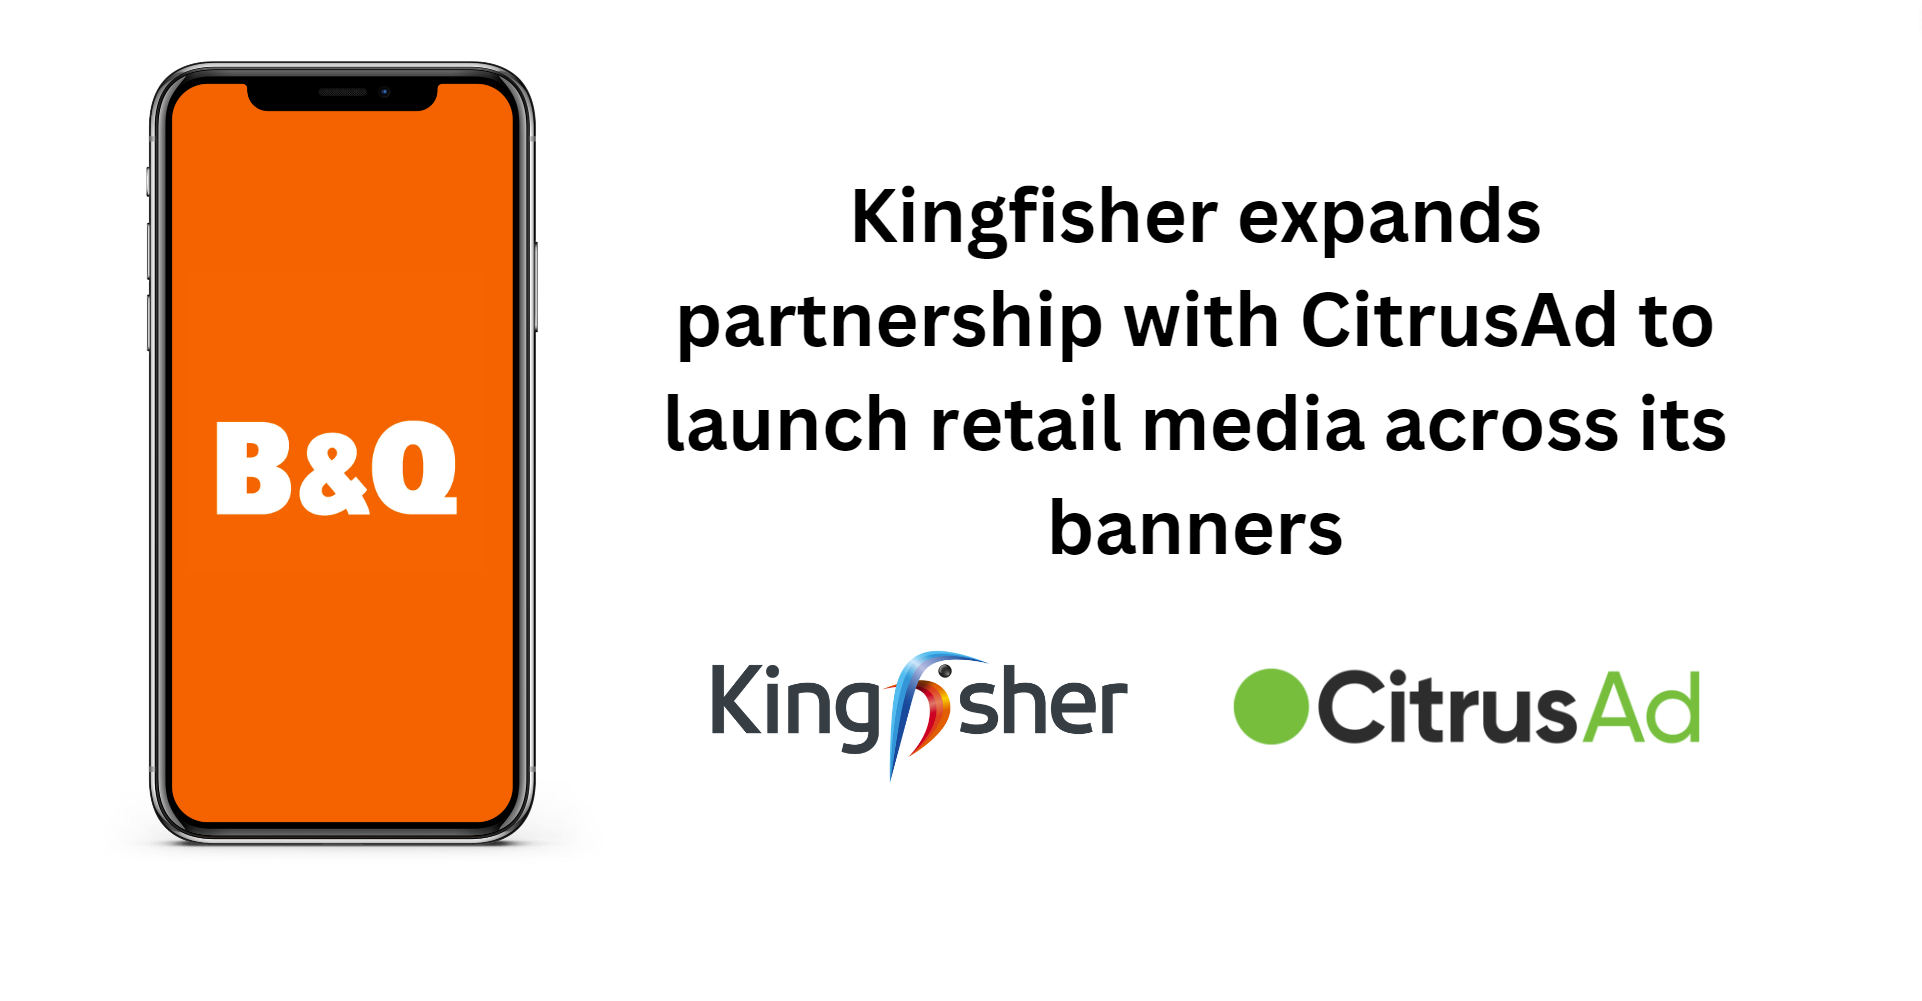 Kingfisher expands partnership with CitrusAd to launch retail media across its banners